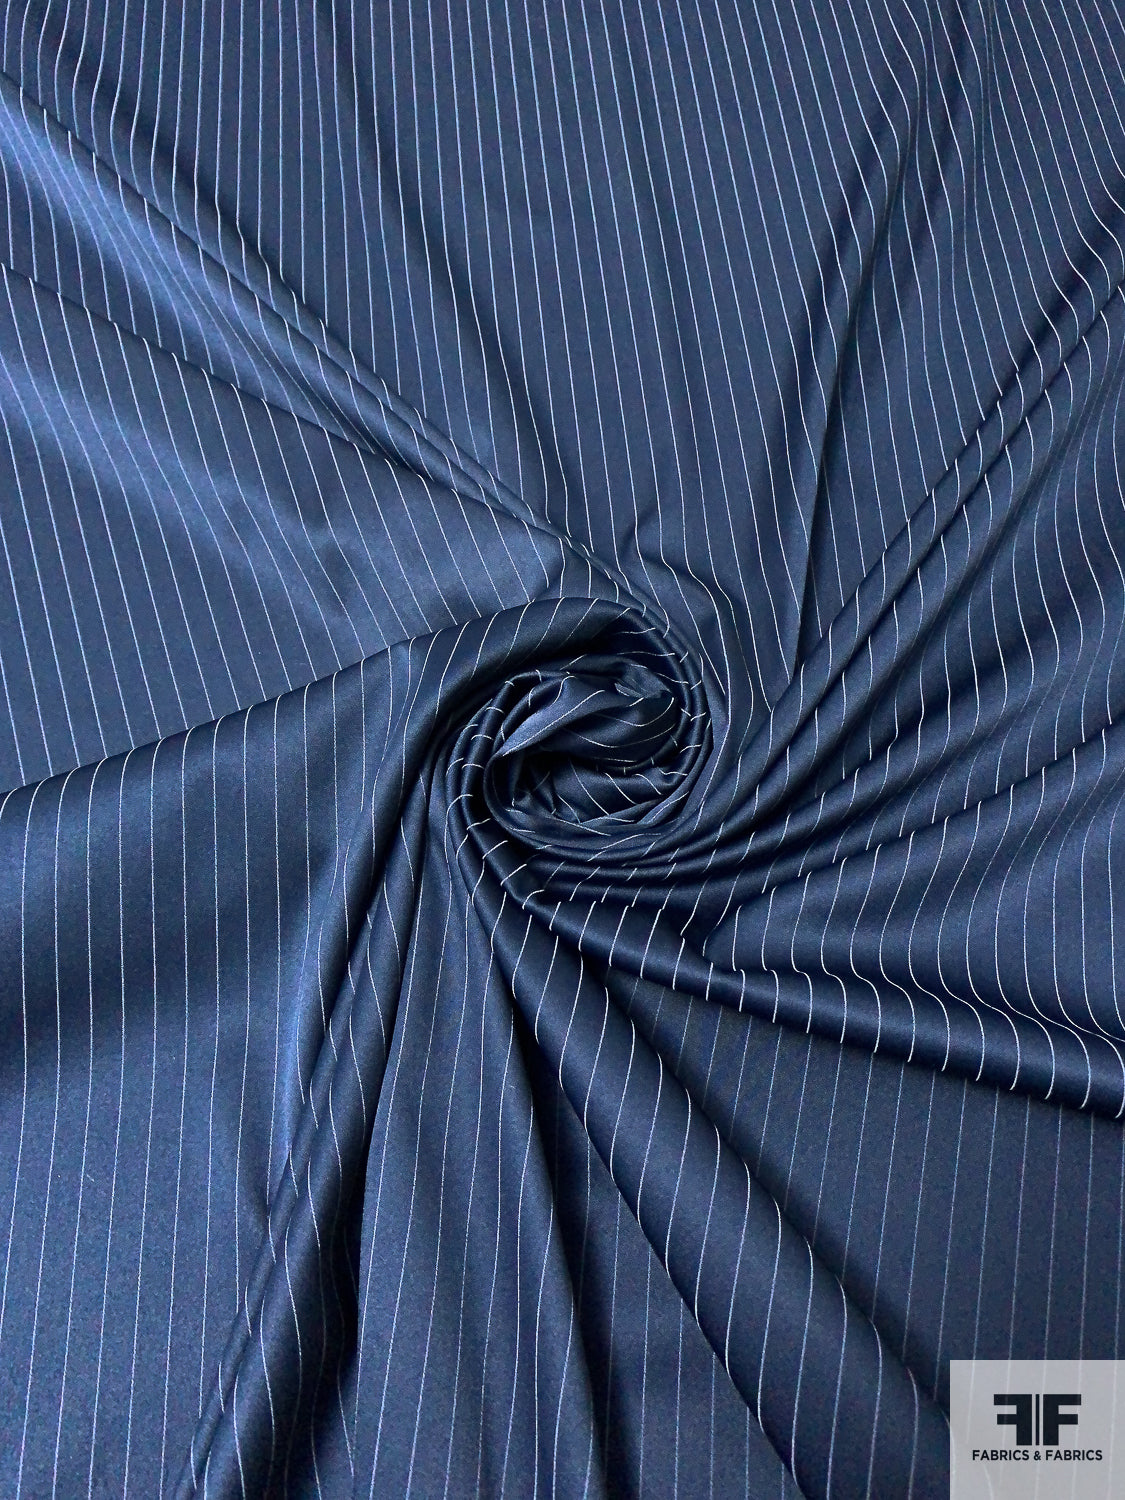 Cotton satin: what fabric is it exactly and what can you make with it?